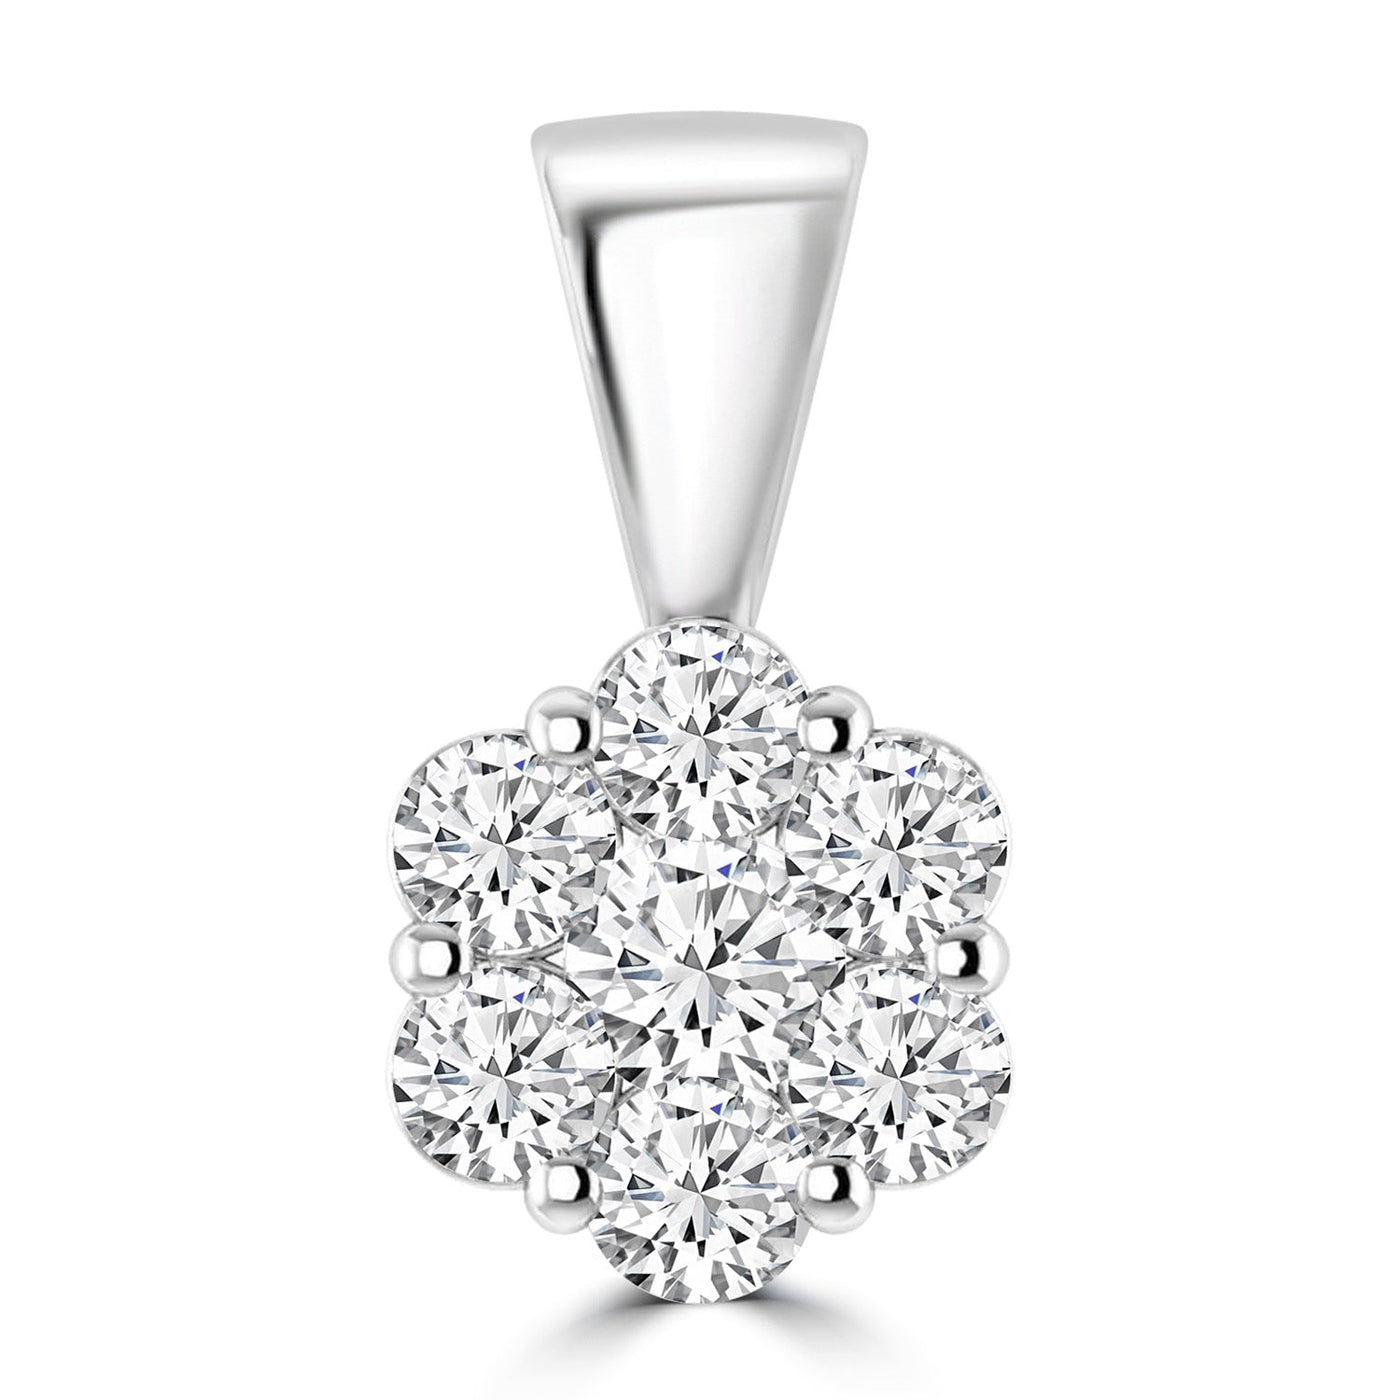 Cluster Diamond Pendant with 0.25ct Diamonds in 9K White Gold - RJ9WPCLUS25GH